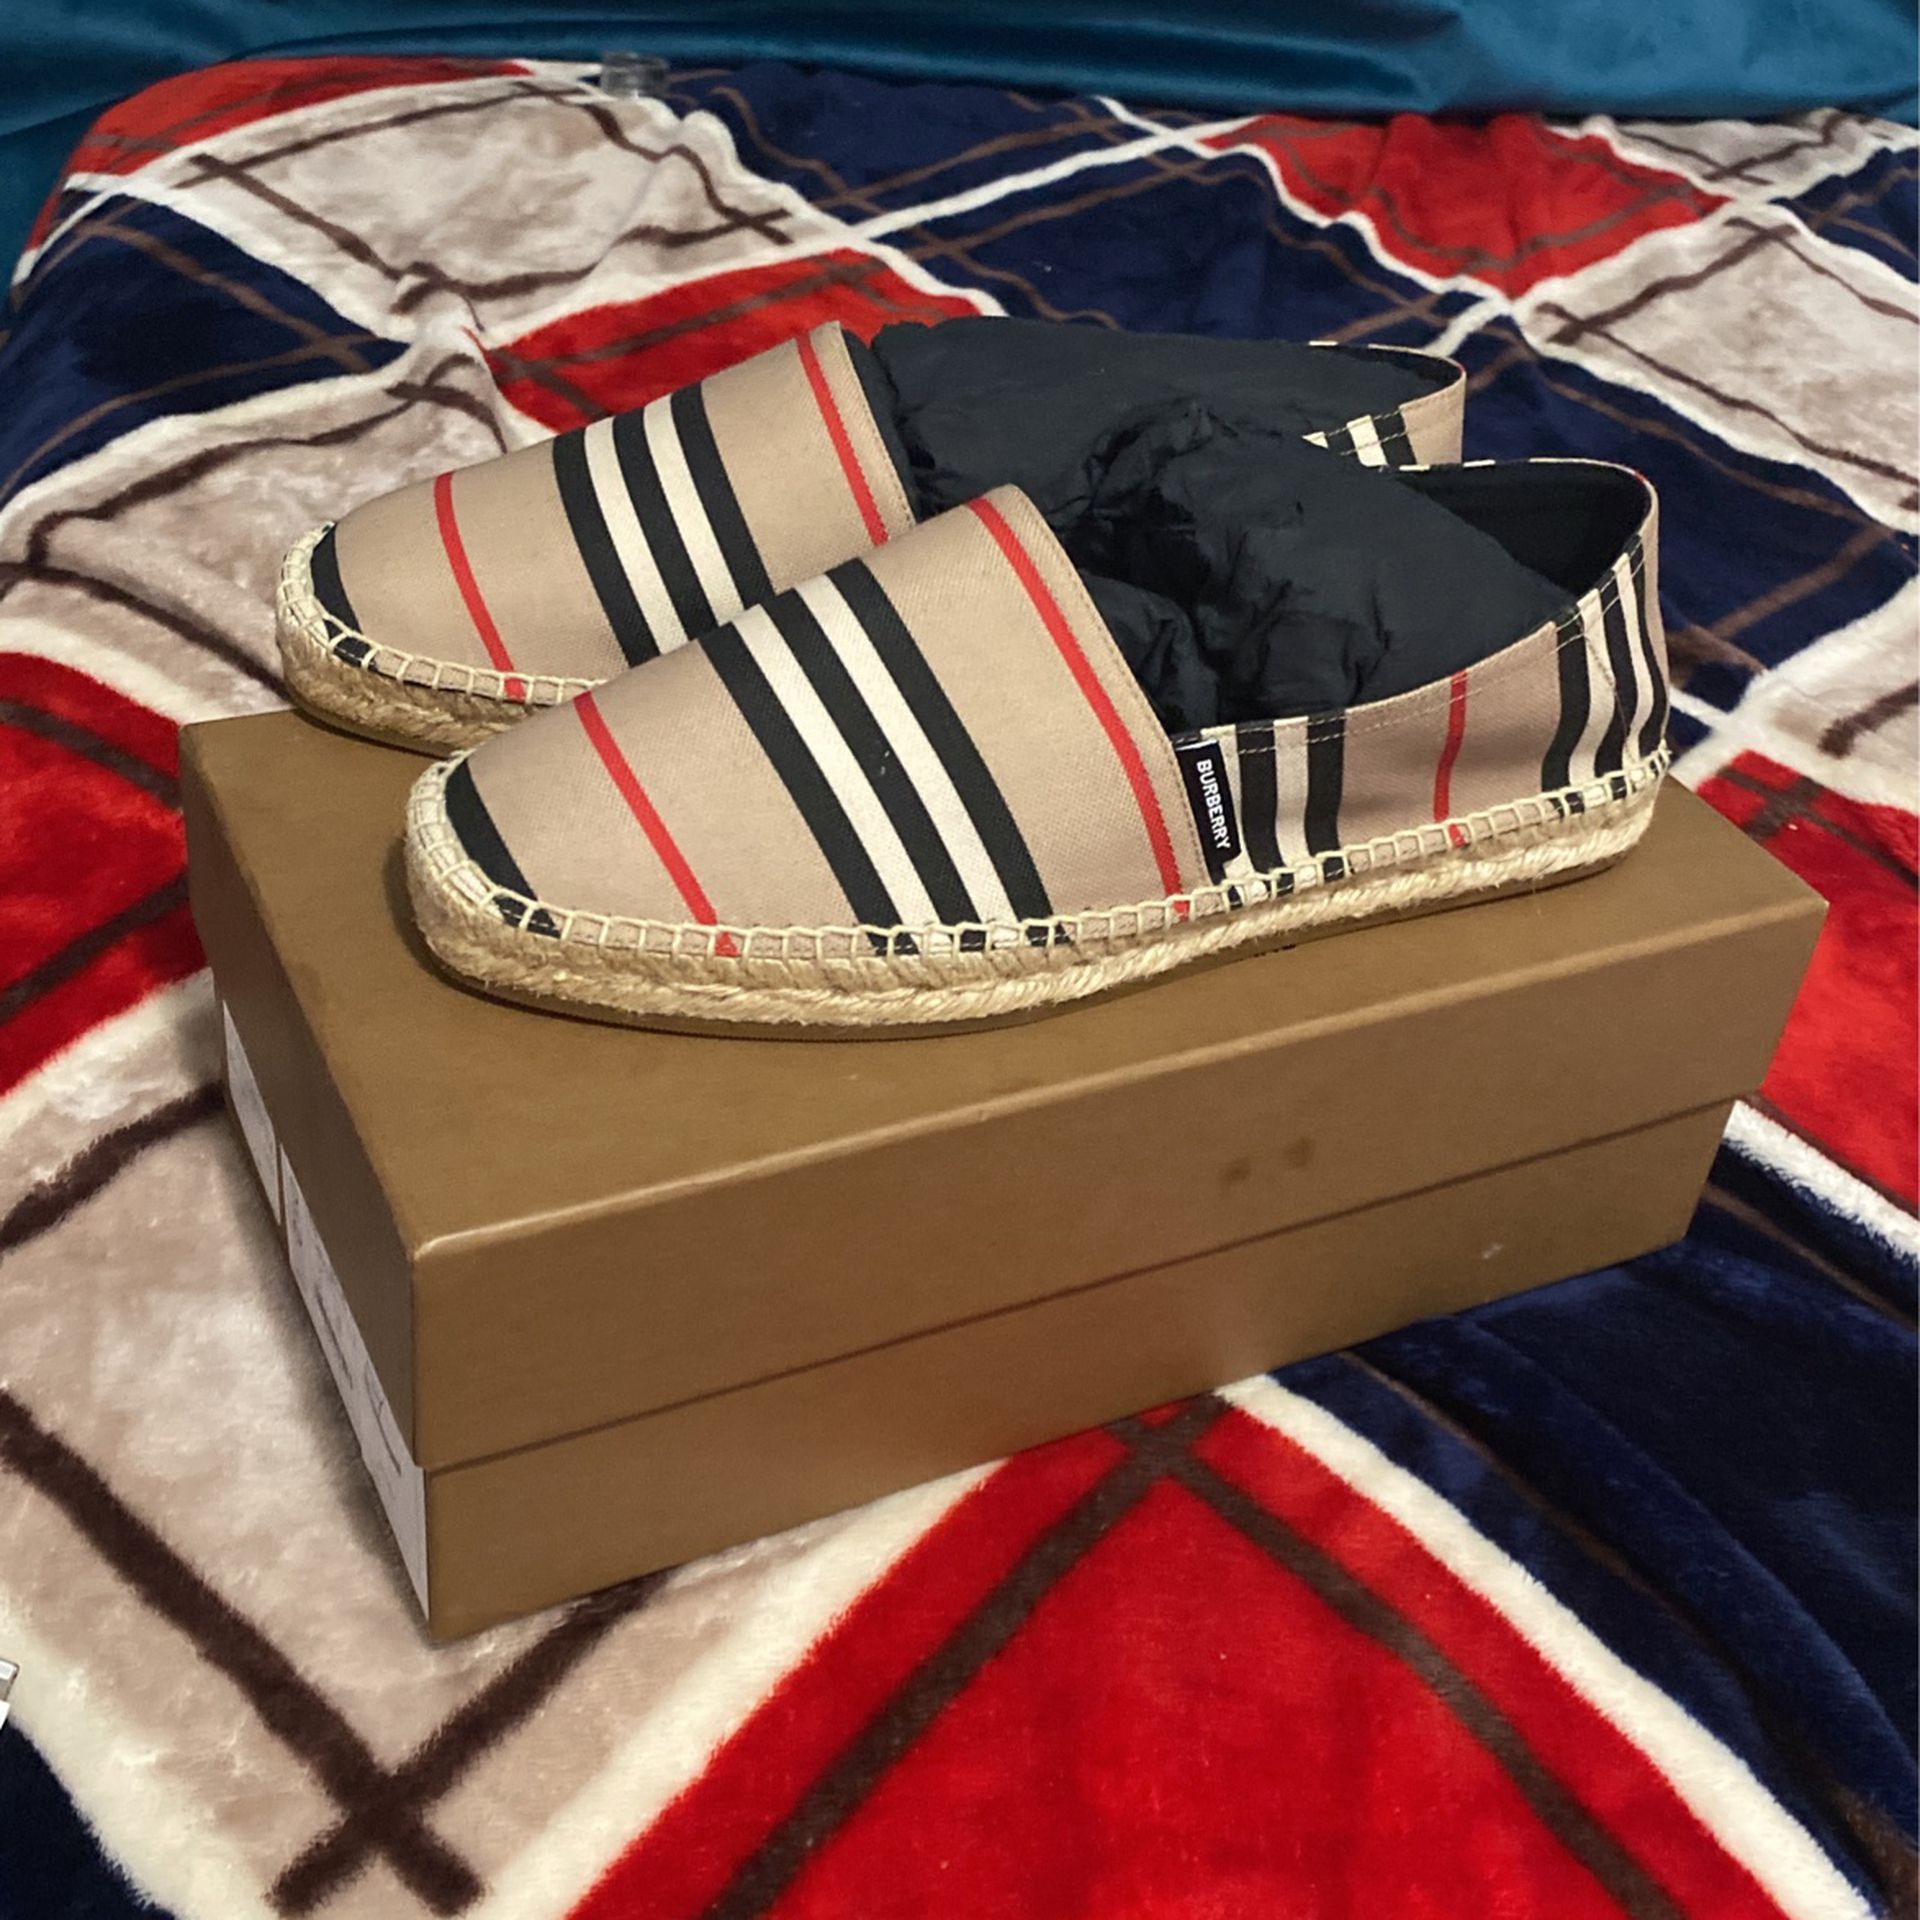 Burberry Shoes In Great Condition Real Not Fake for Sale in Los Angeles, CA  - OfferUp